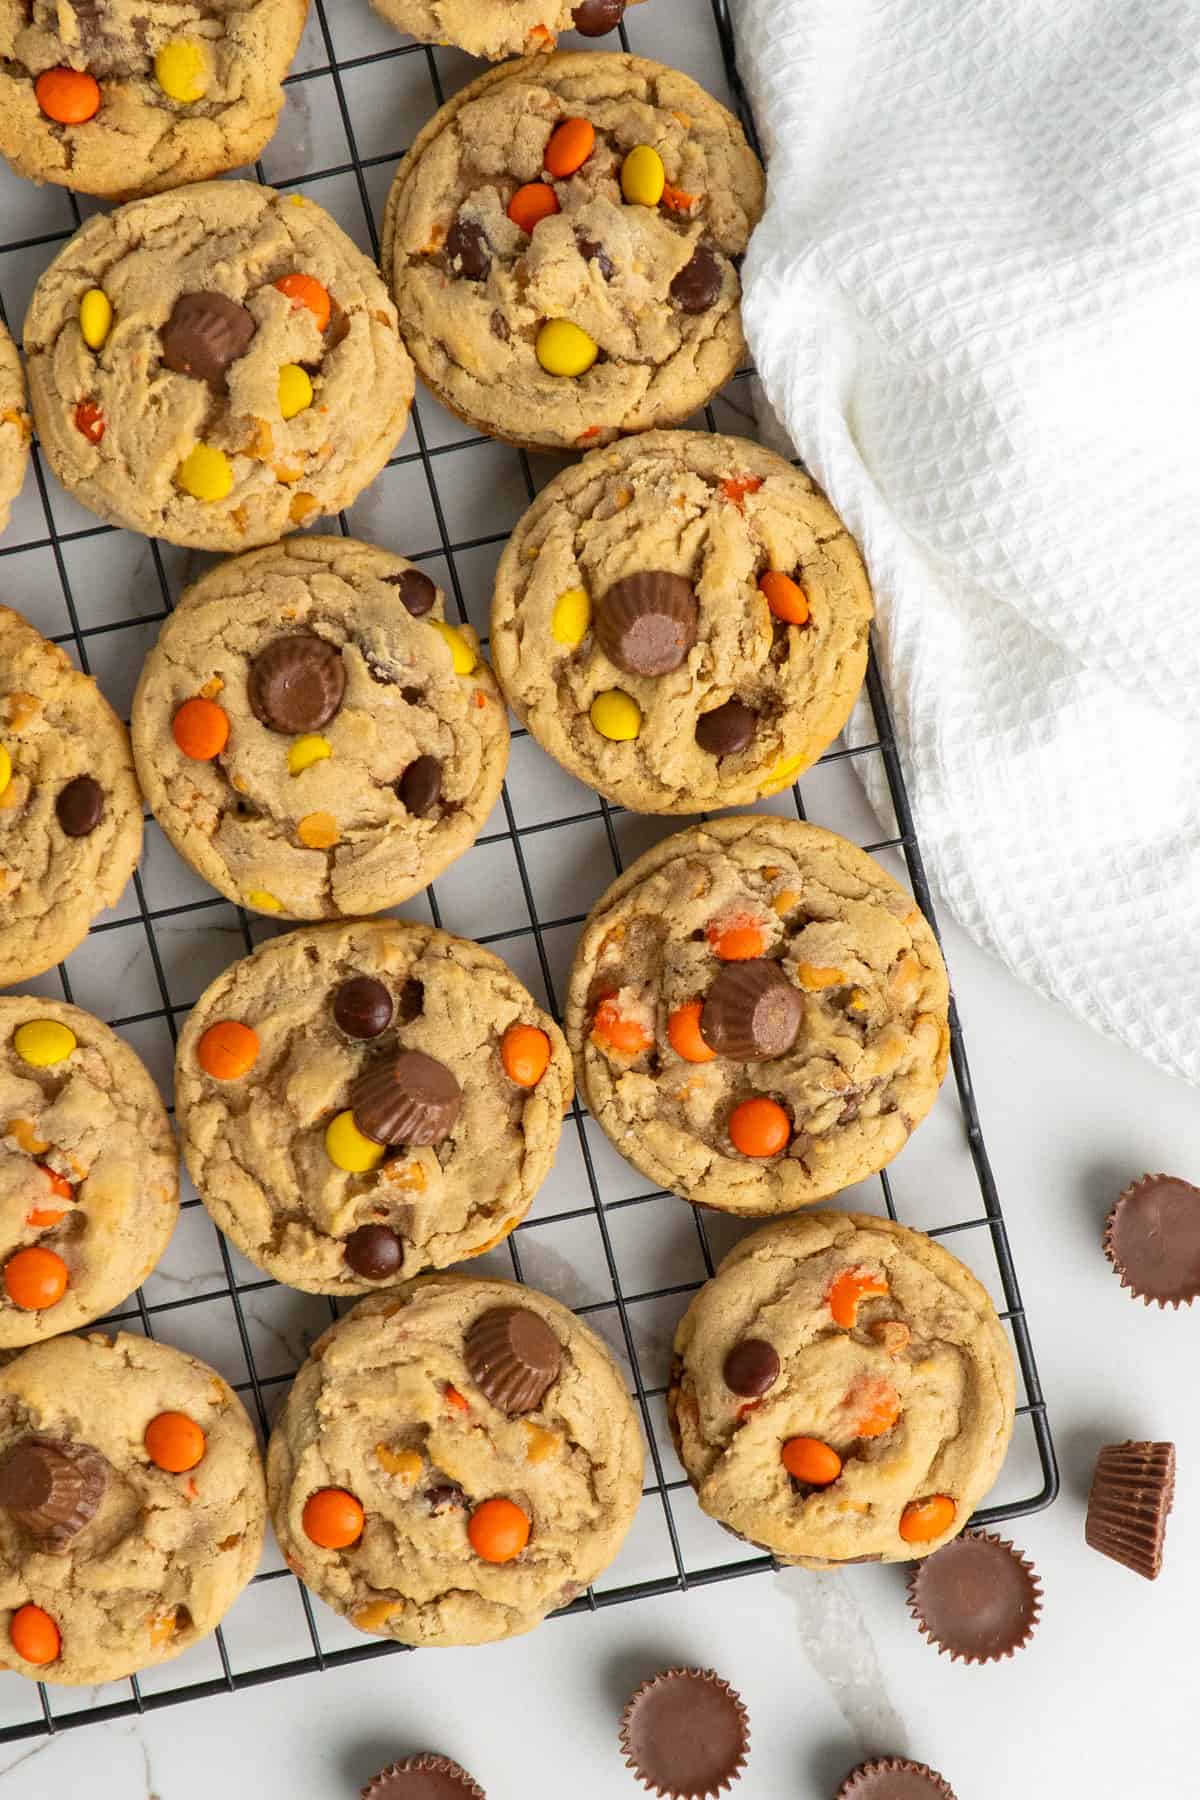 Reese's pieces cookies on a cooling rack.